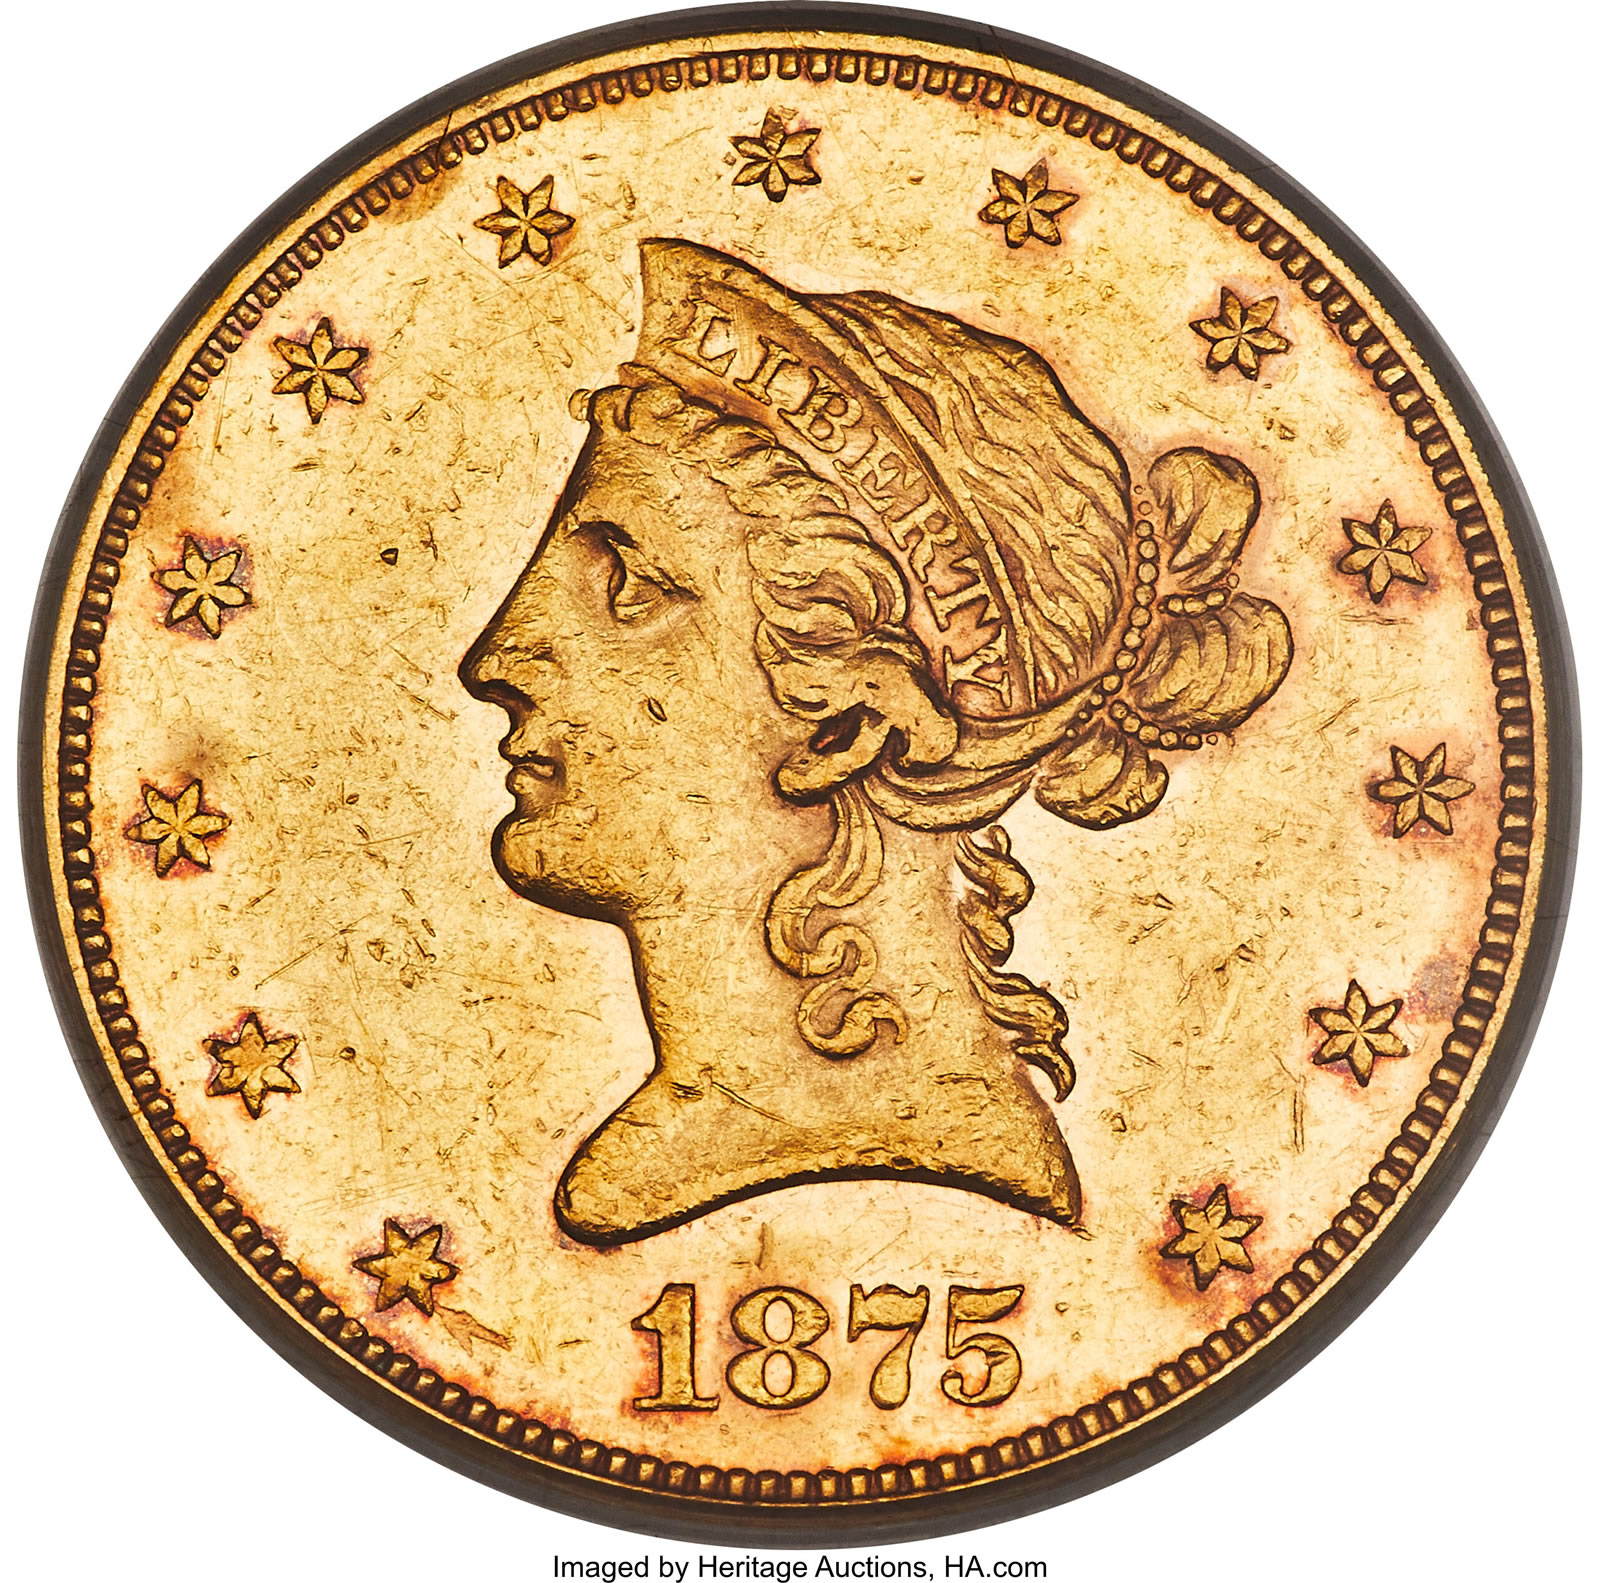 Heritage Oct. 6-9 Long Beach US Coins Auction Highlights